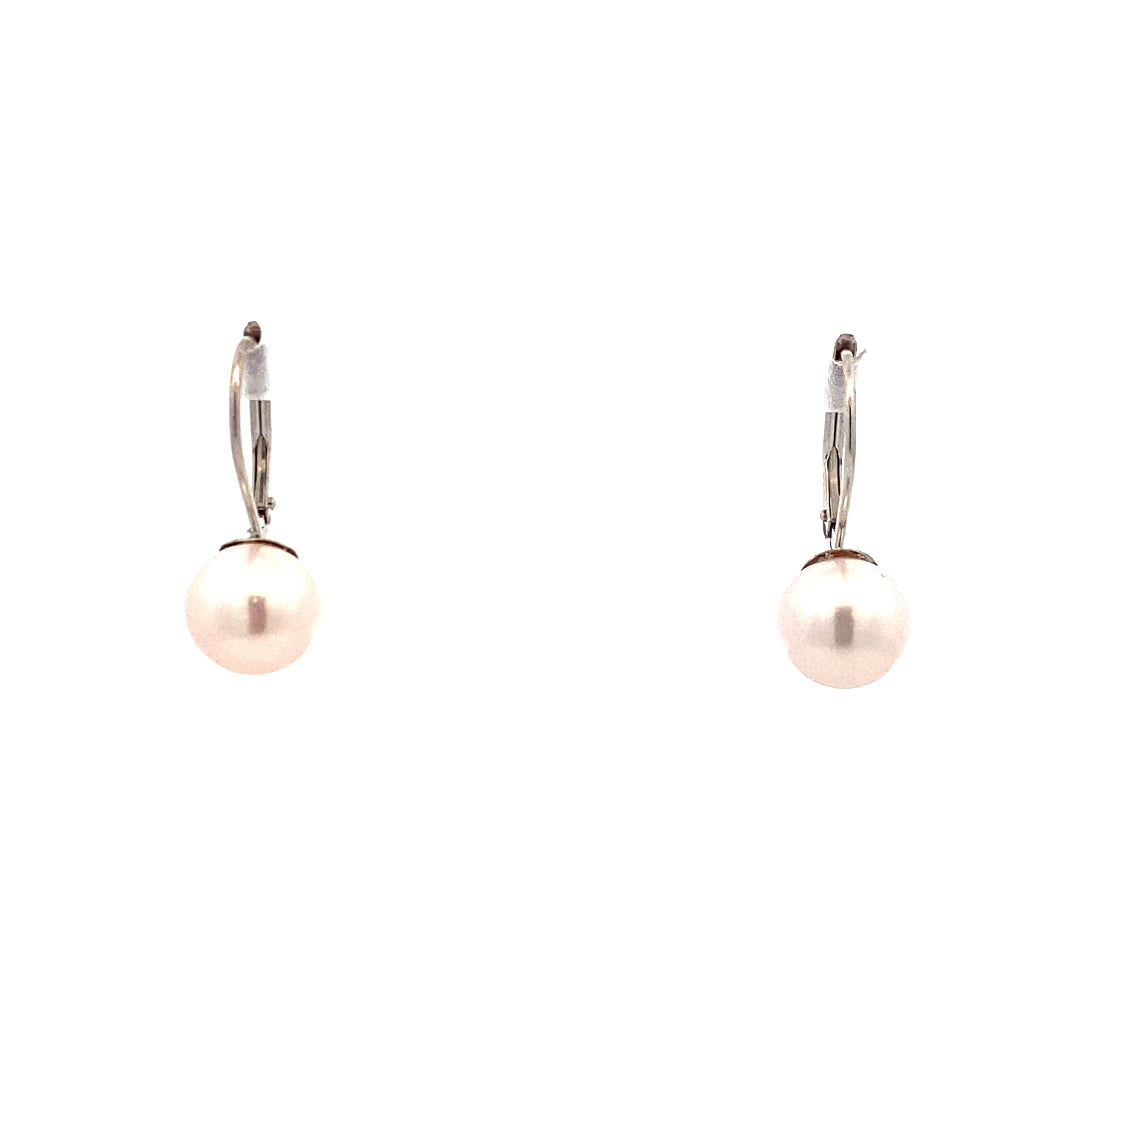 Beeghly & Co. 14 KT White Gold Pearl Drop Earrings